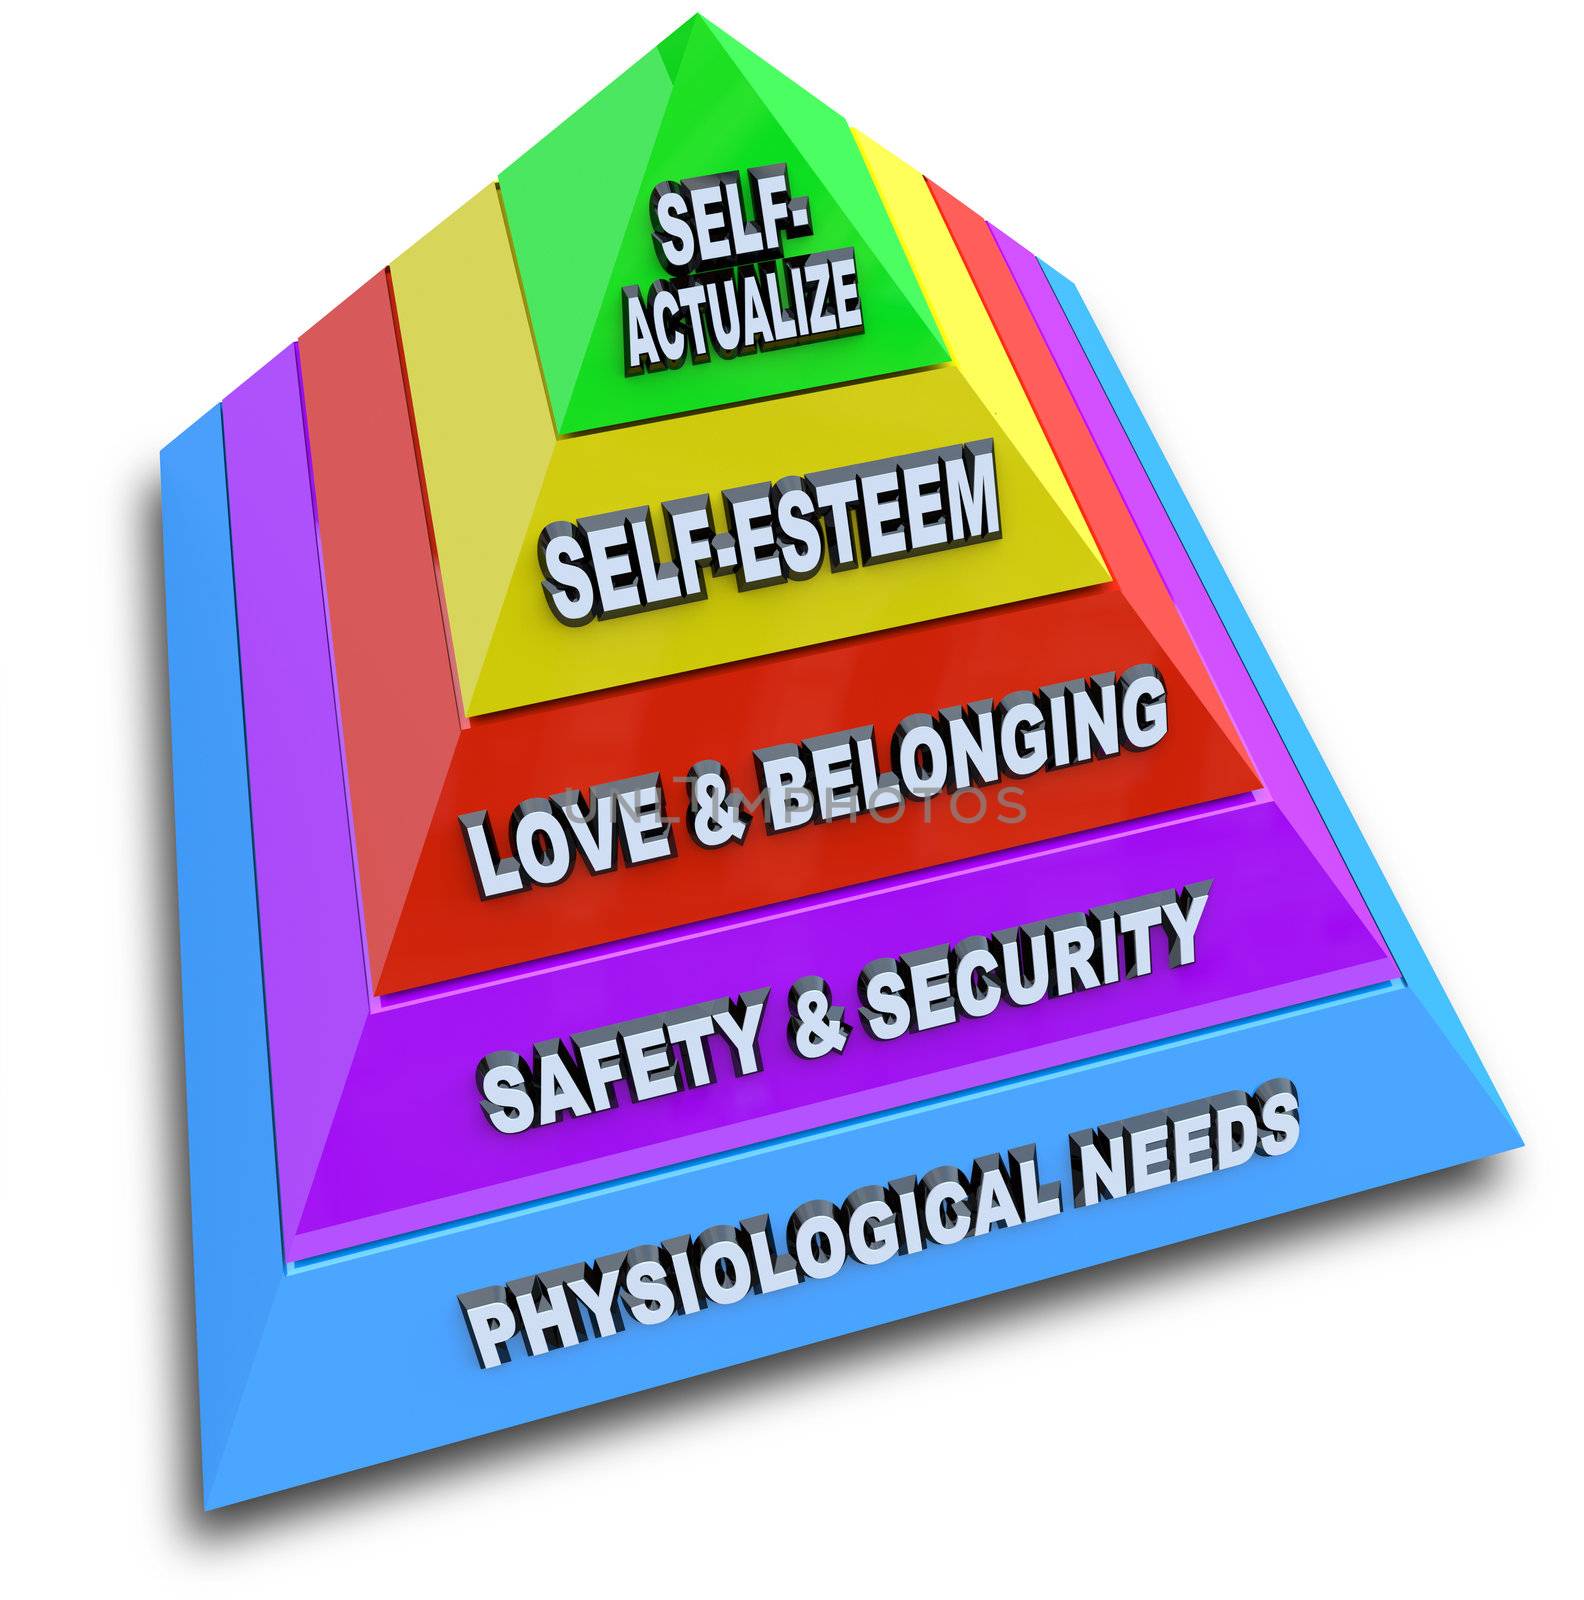 Hierarchy of Needs Pyramid - Maslow's Theory Illustrated by iQoncept